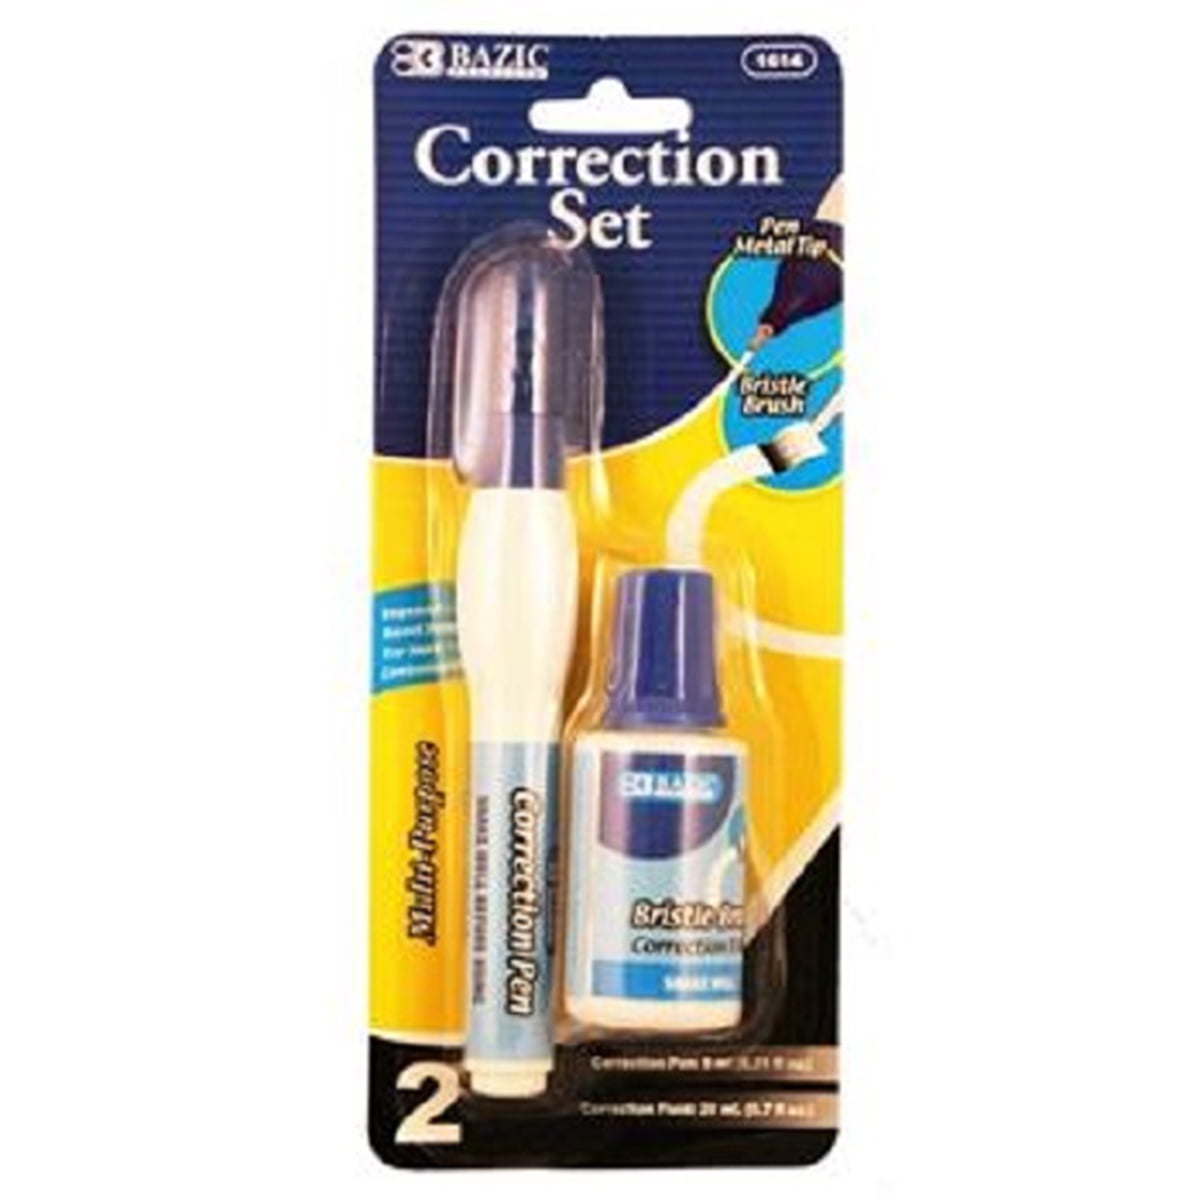 Product Of Bazic, Correction Pen With Fluid, Count 1 - School Supply / Grab  Varieties & Flavors 